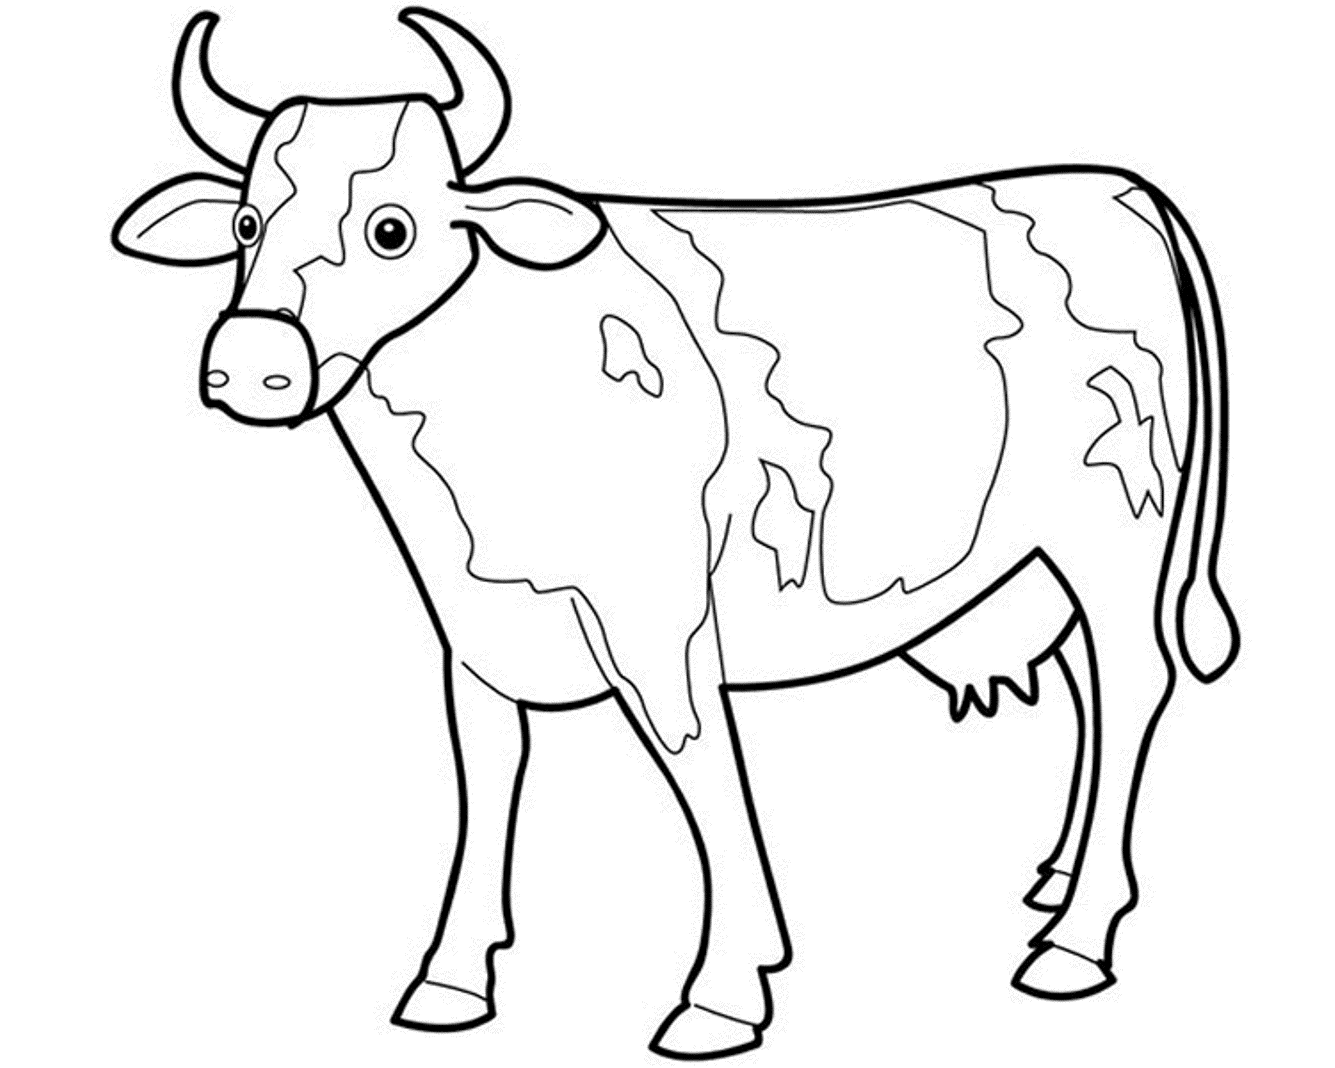 Animal Cow S45b4 Coloring Page